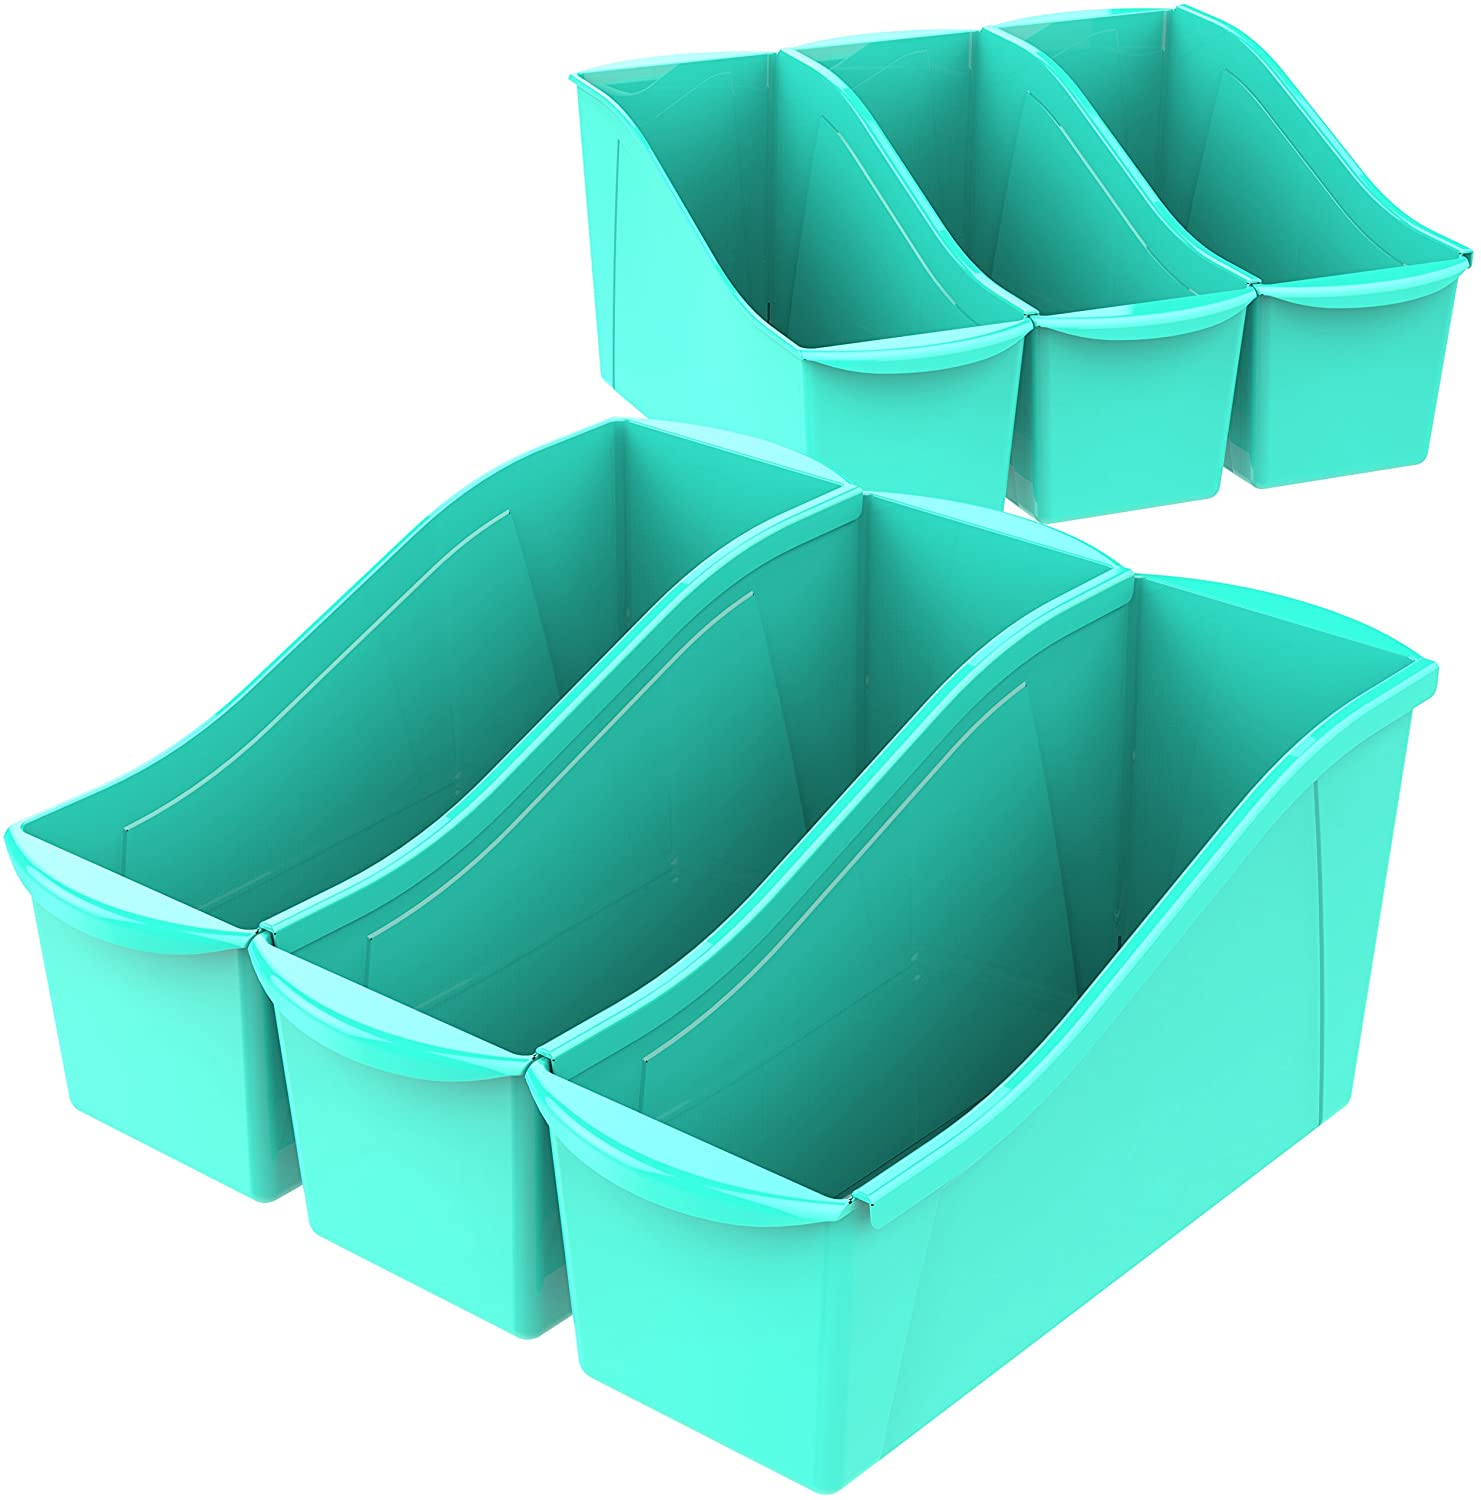 storex-set-of-6-large-book-bins-for-only-10-02-was-22-dollar